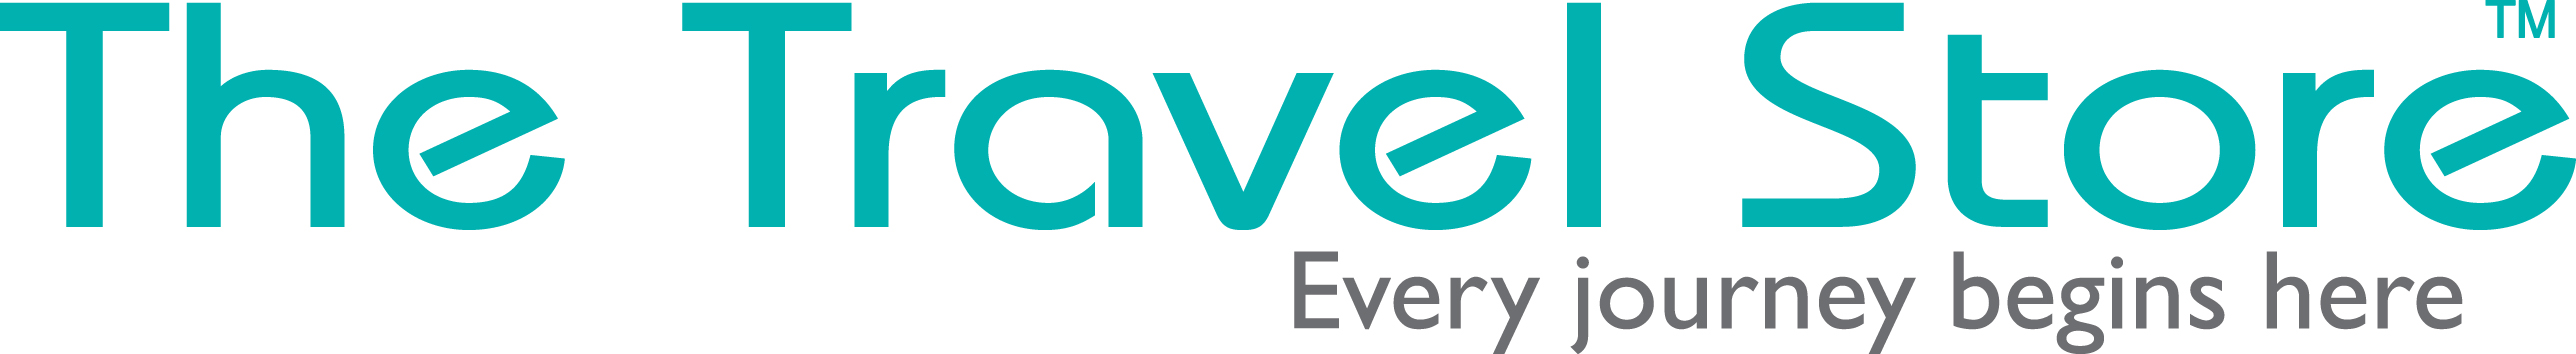 The Travel Store Logo